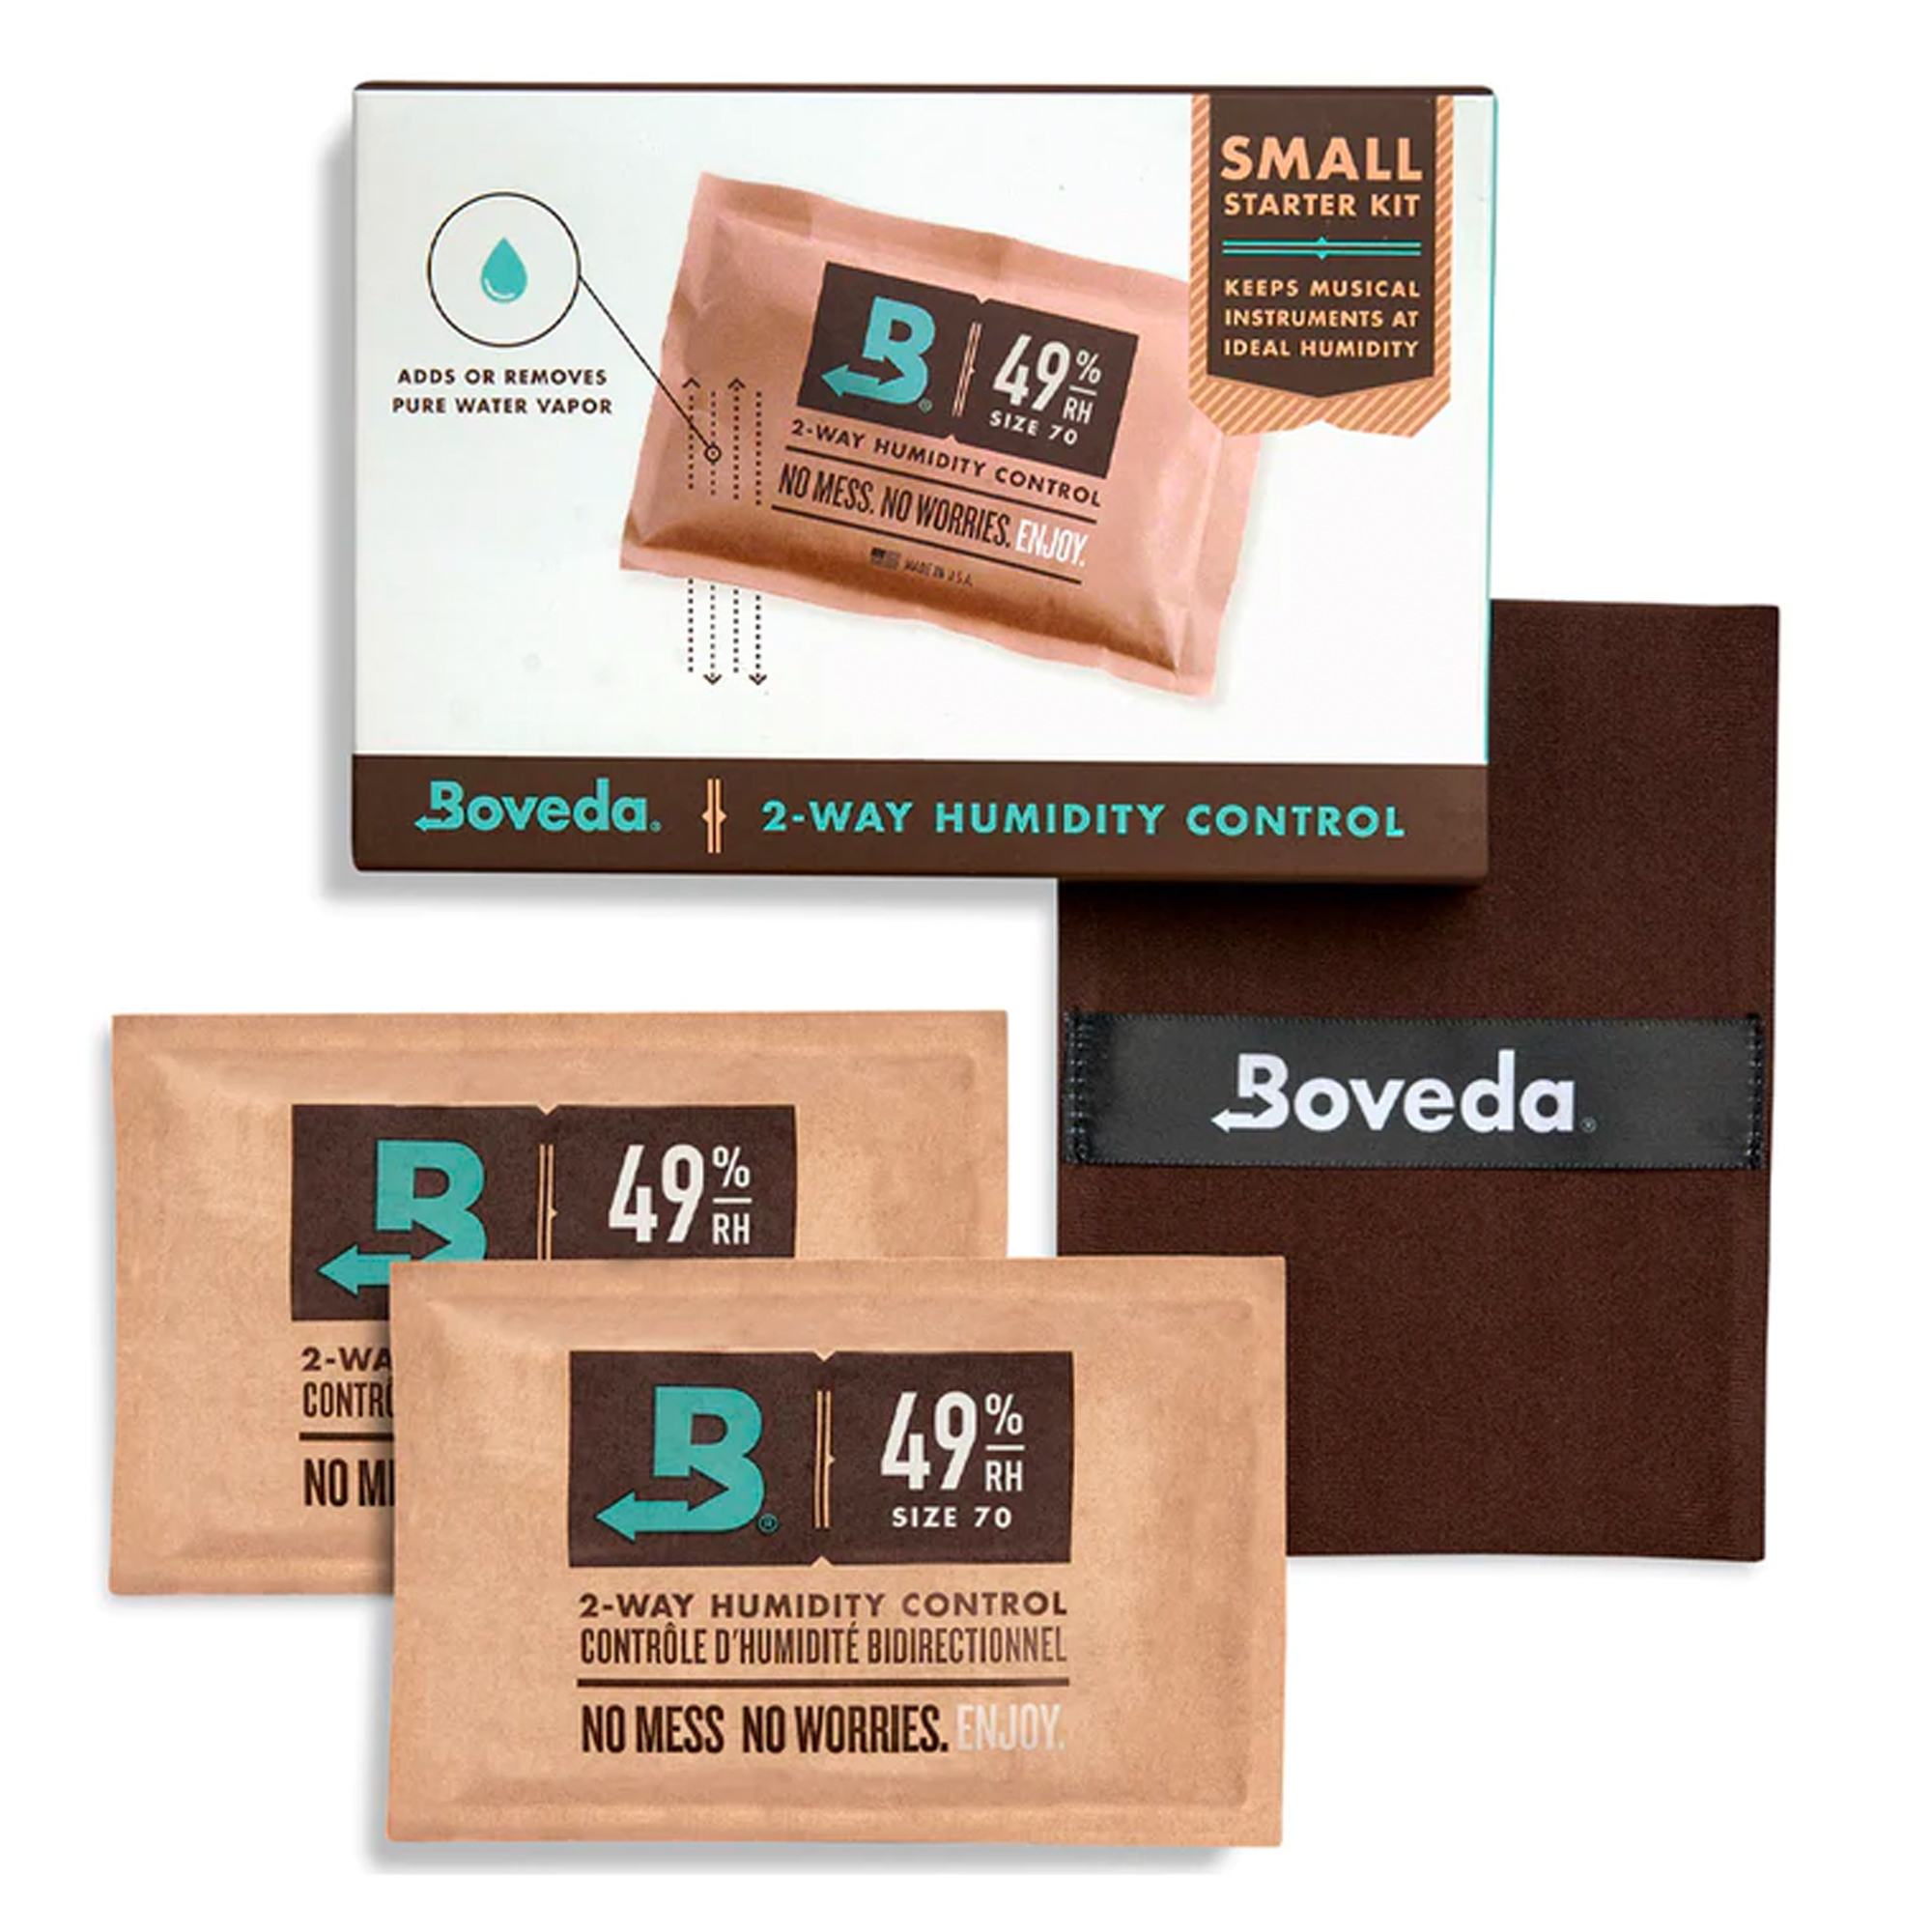 Boveda Humidification Starter Kit (Small) in action